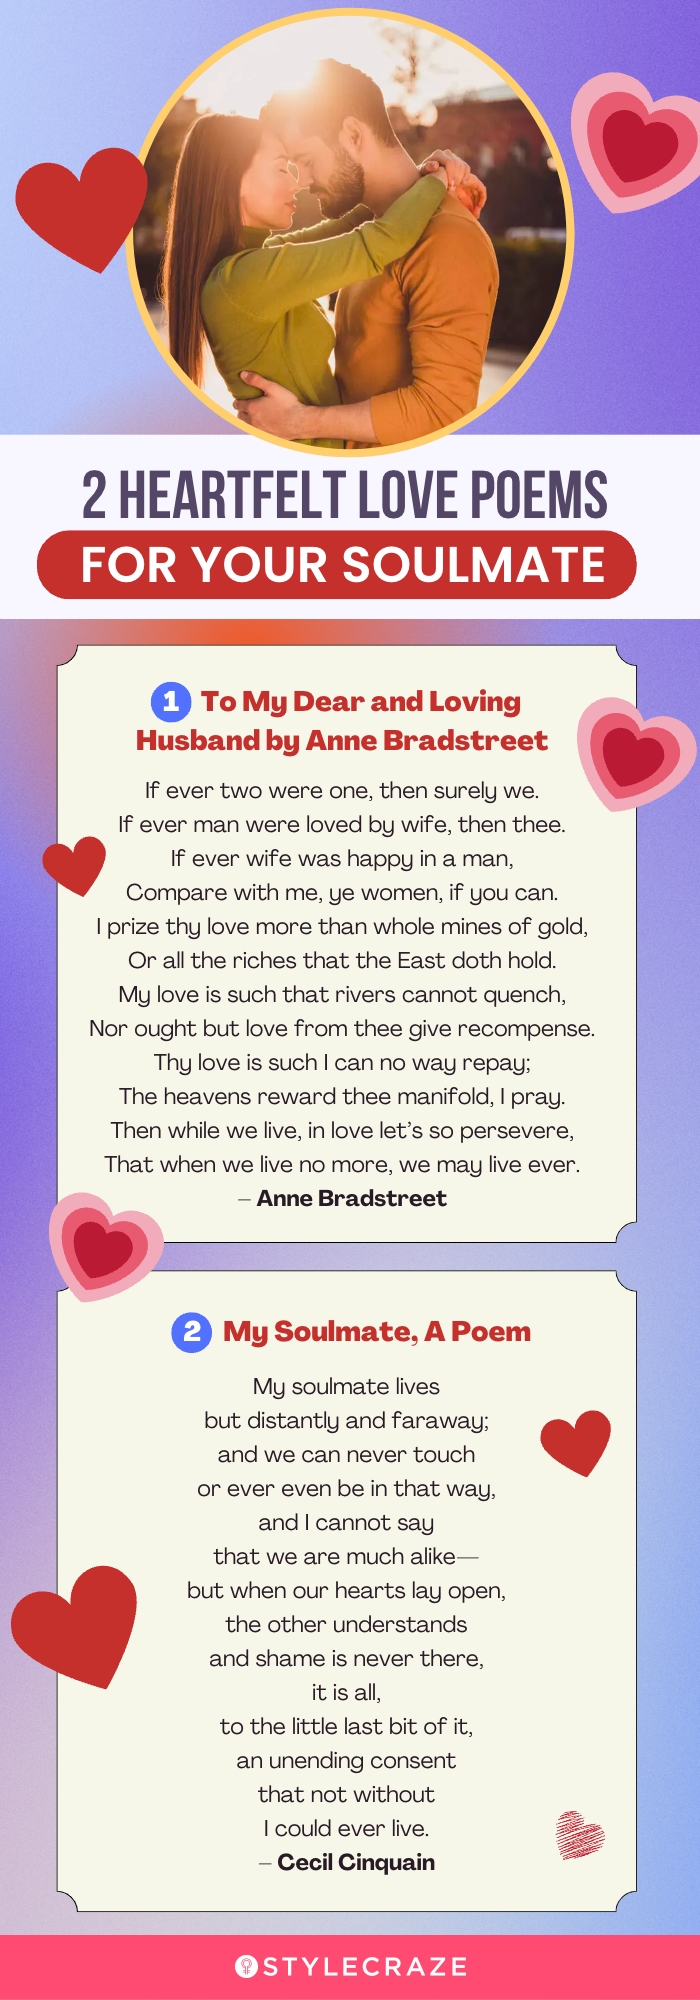 2 heartfelt love poems for your soulmate (infographic)